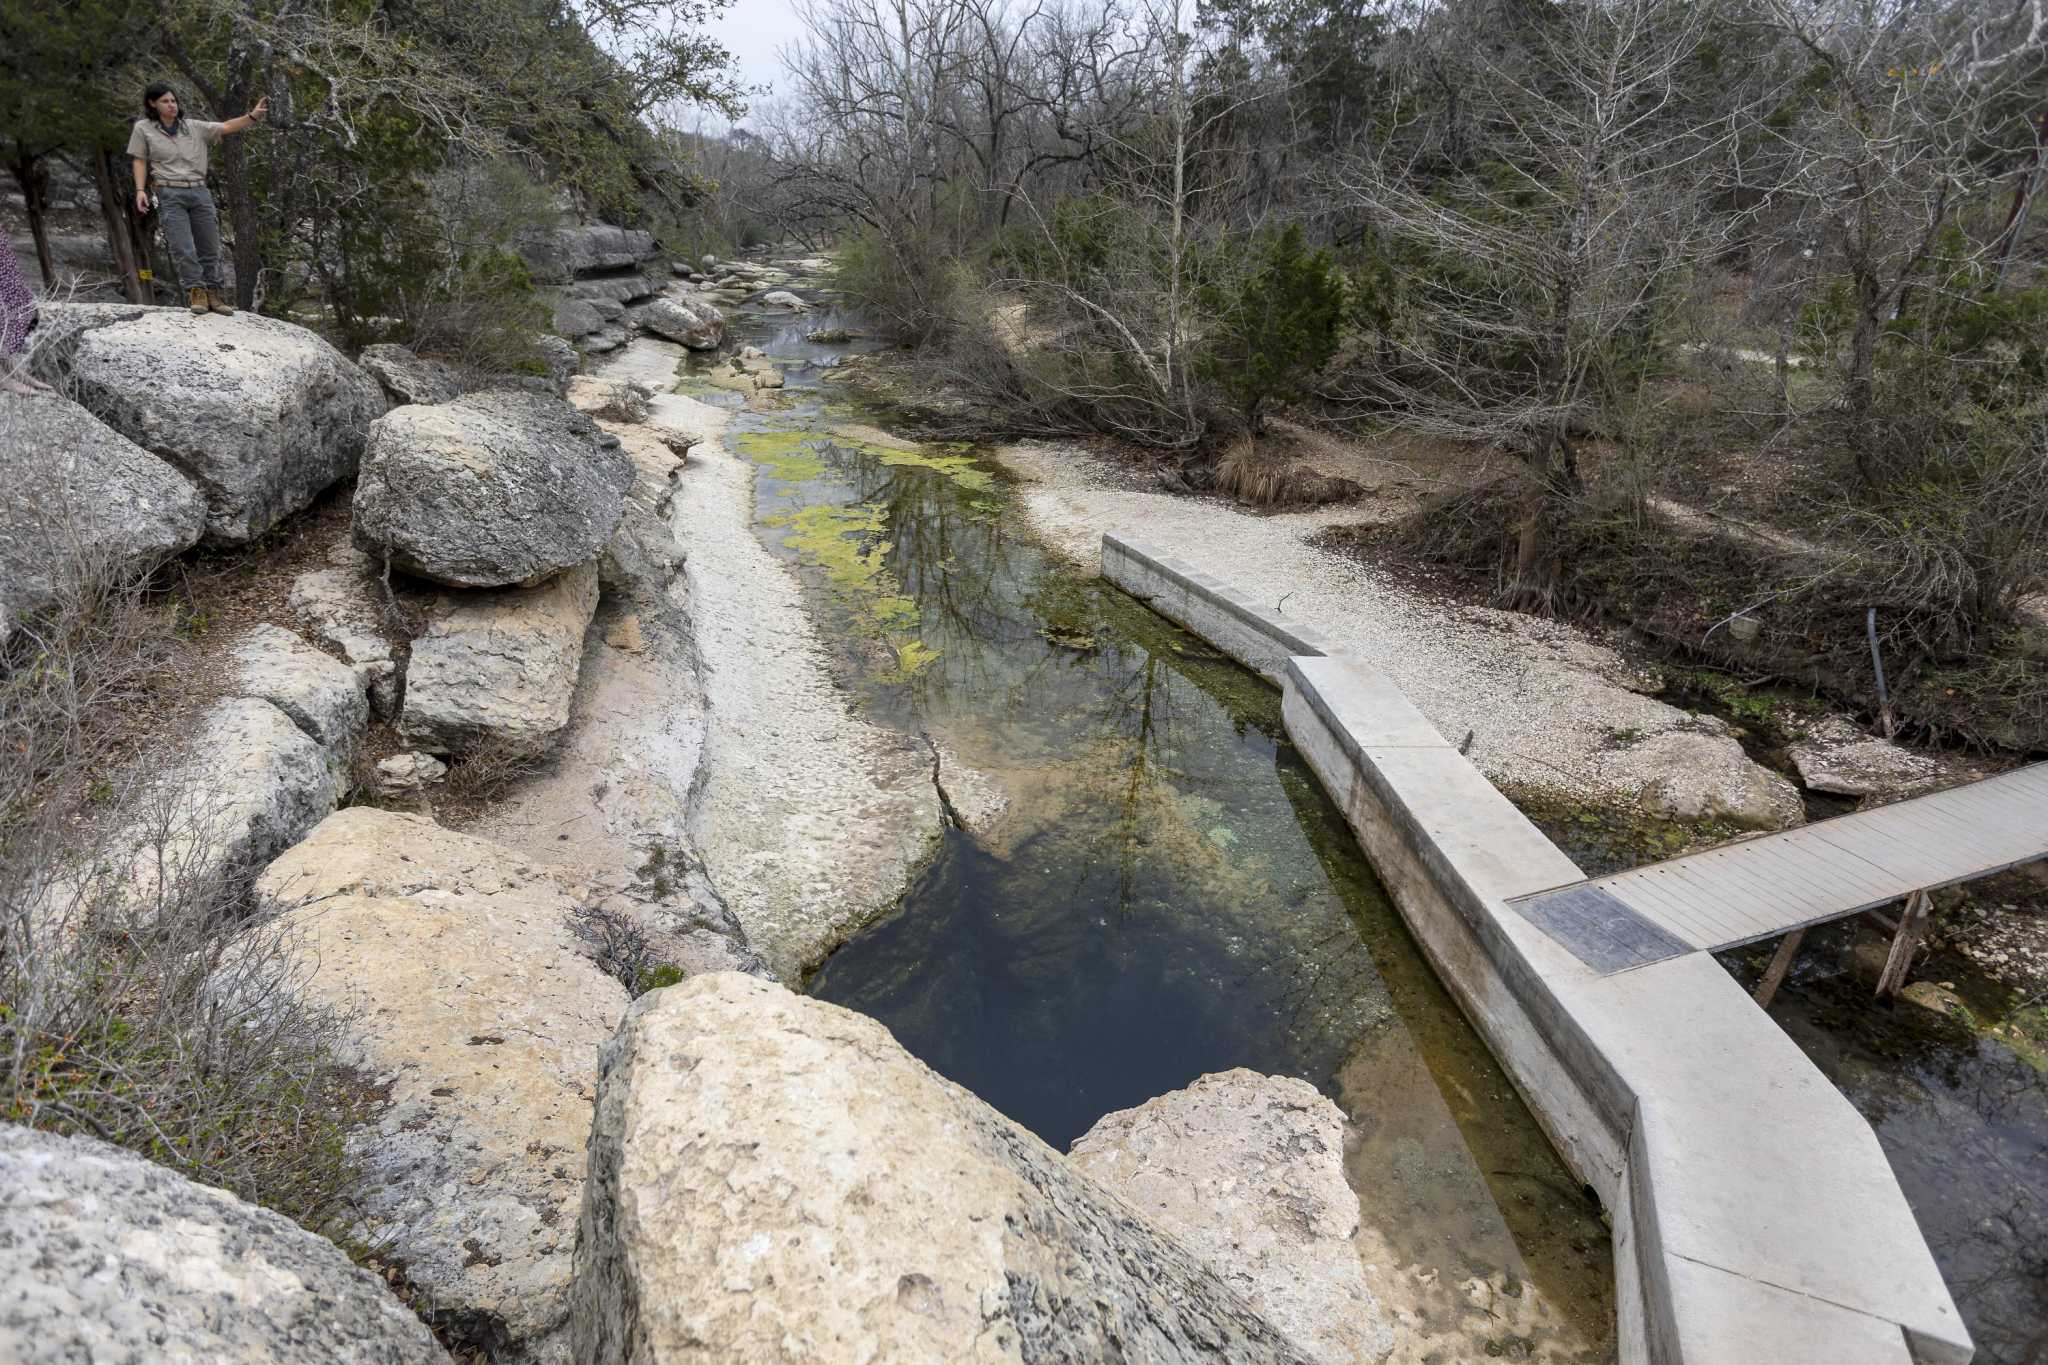 Wimberley and Aqua Texas locked in battle over sewage system